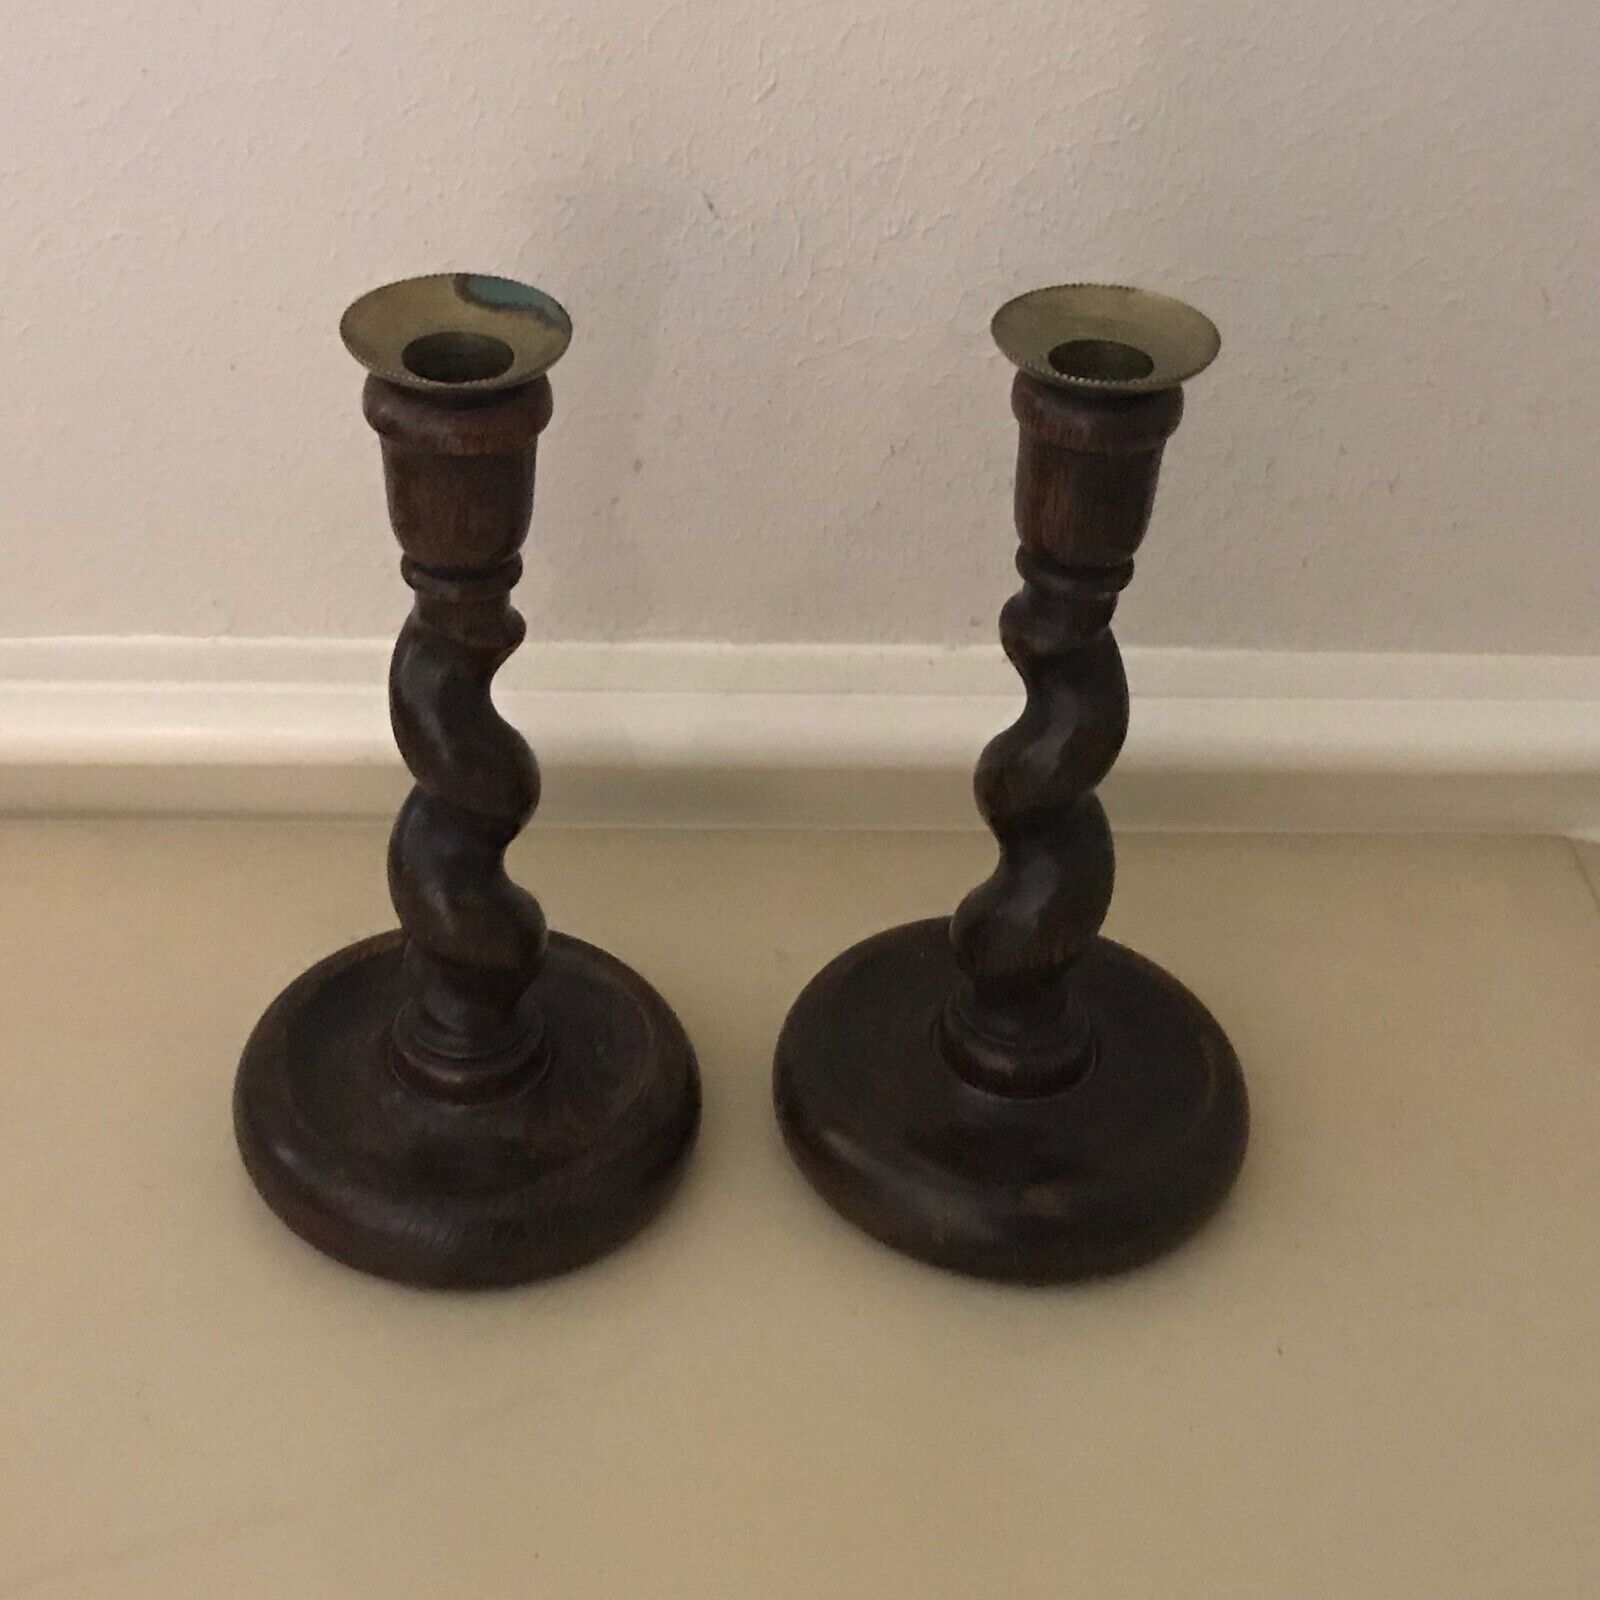 Antique English Pair Oak Barley-Twist Candle Holders  (Circa 1900)  8-1/2”height